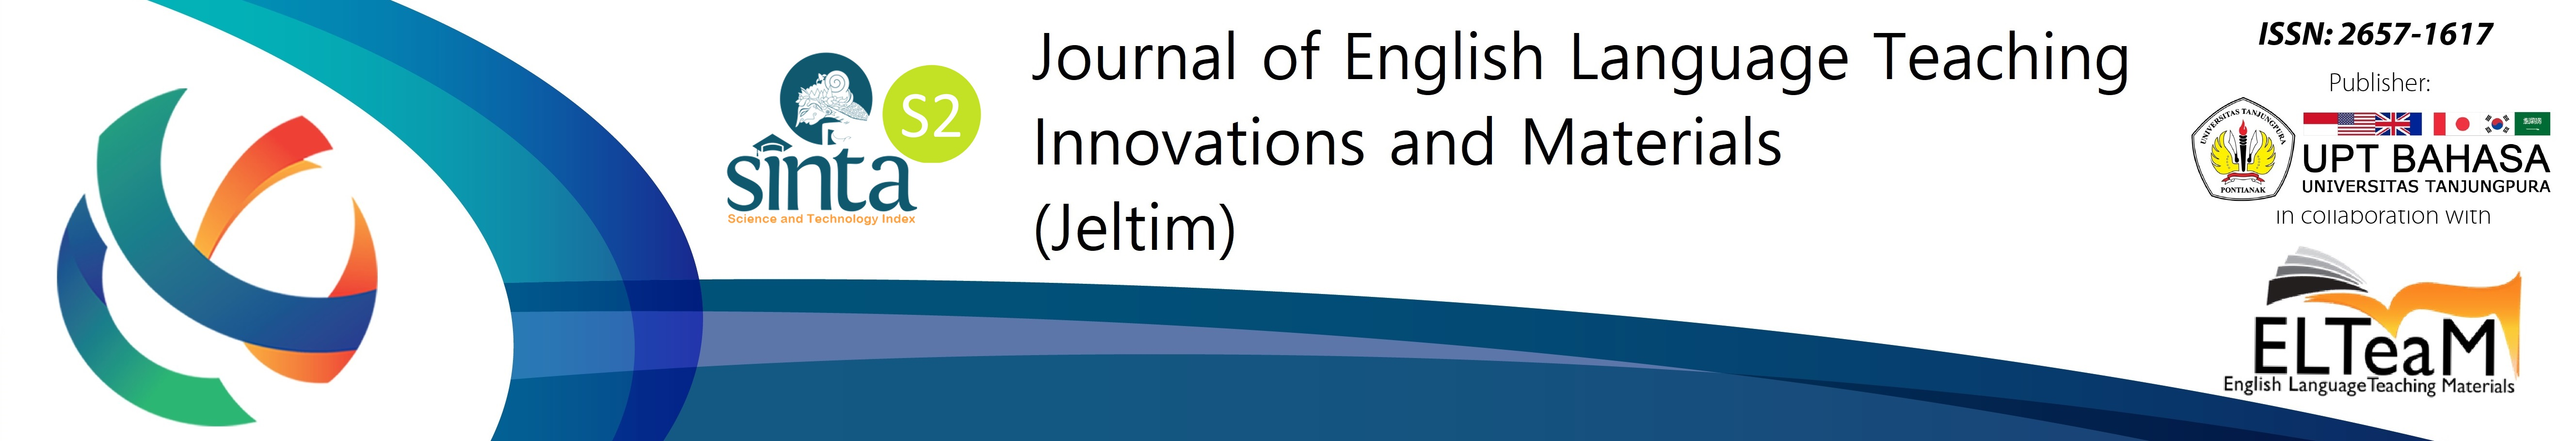 Journal of English Language Teaching Innovations and Materials (Jeltim)